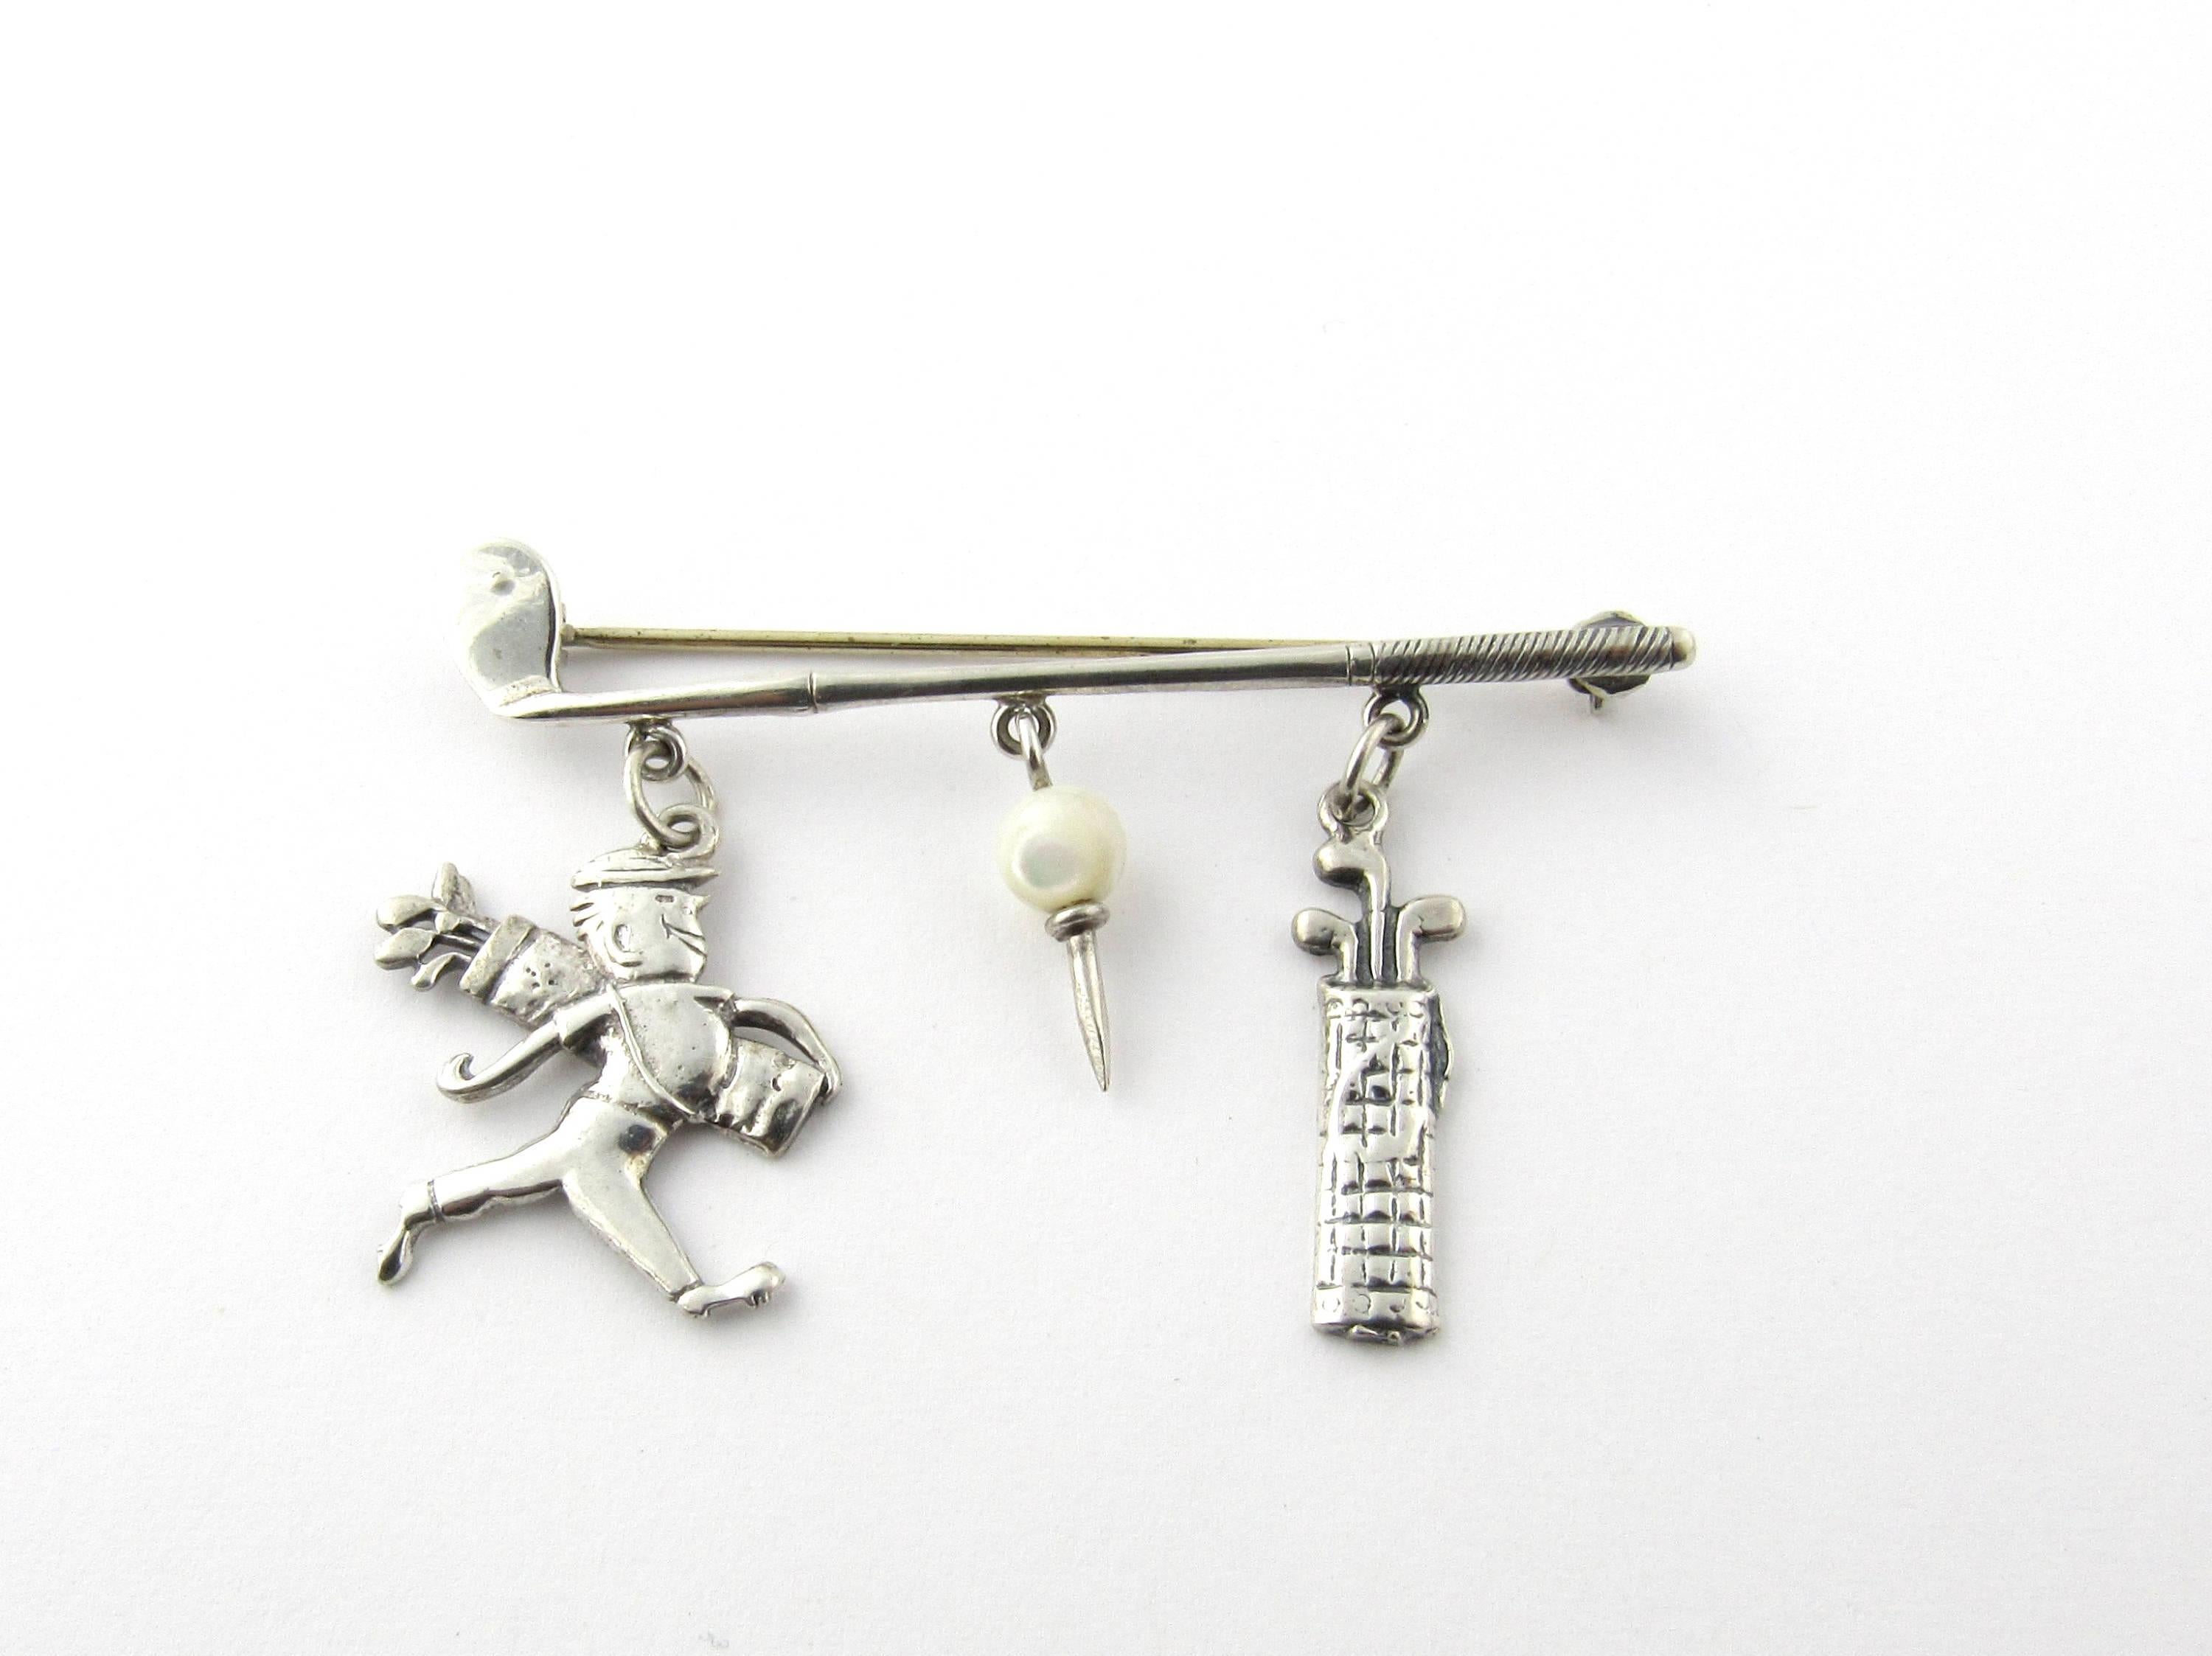 Vintage Sterling Silver Golf Brooch
A must for the avid golfer! 
This whimsical pin features a golf club with golf bag, caddy and golf ball dangling from it. 
Size: 53 mm x 23 mm 
Weight: 3.6 dwt. / 5.7 gr. 
Hallmark: Sterling 
Very good condition,